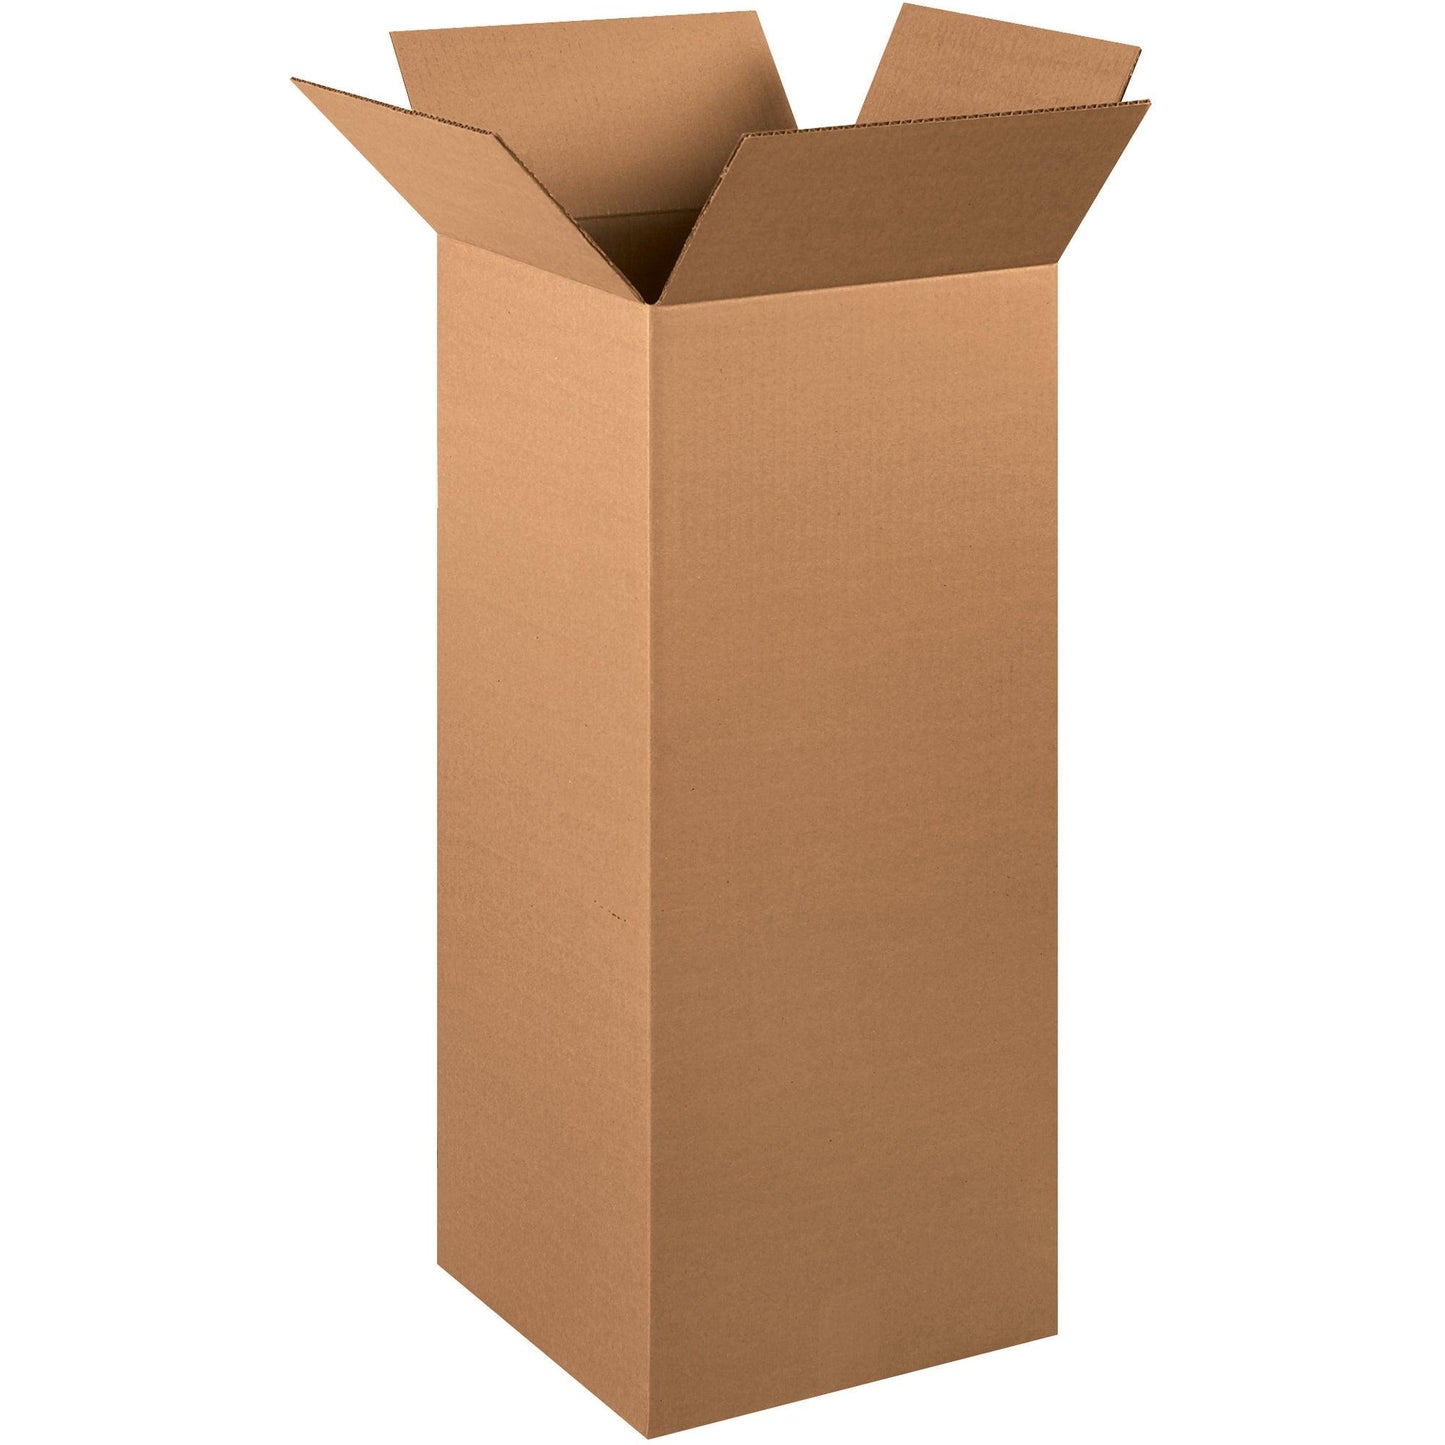 12 x 12 x 30" Tall Corrugated Boxes - 121230